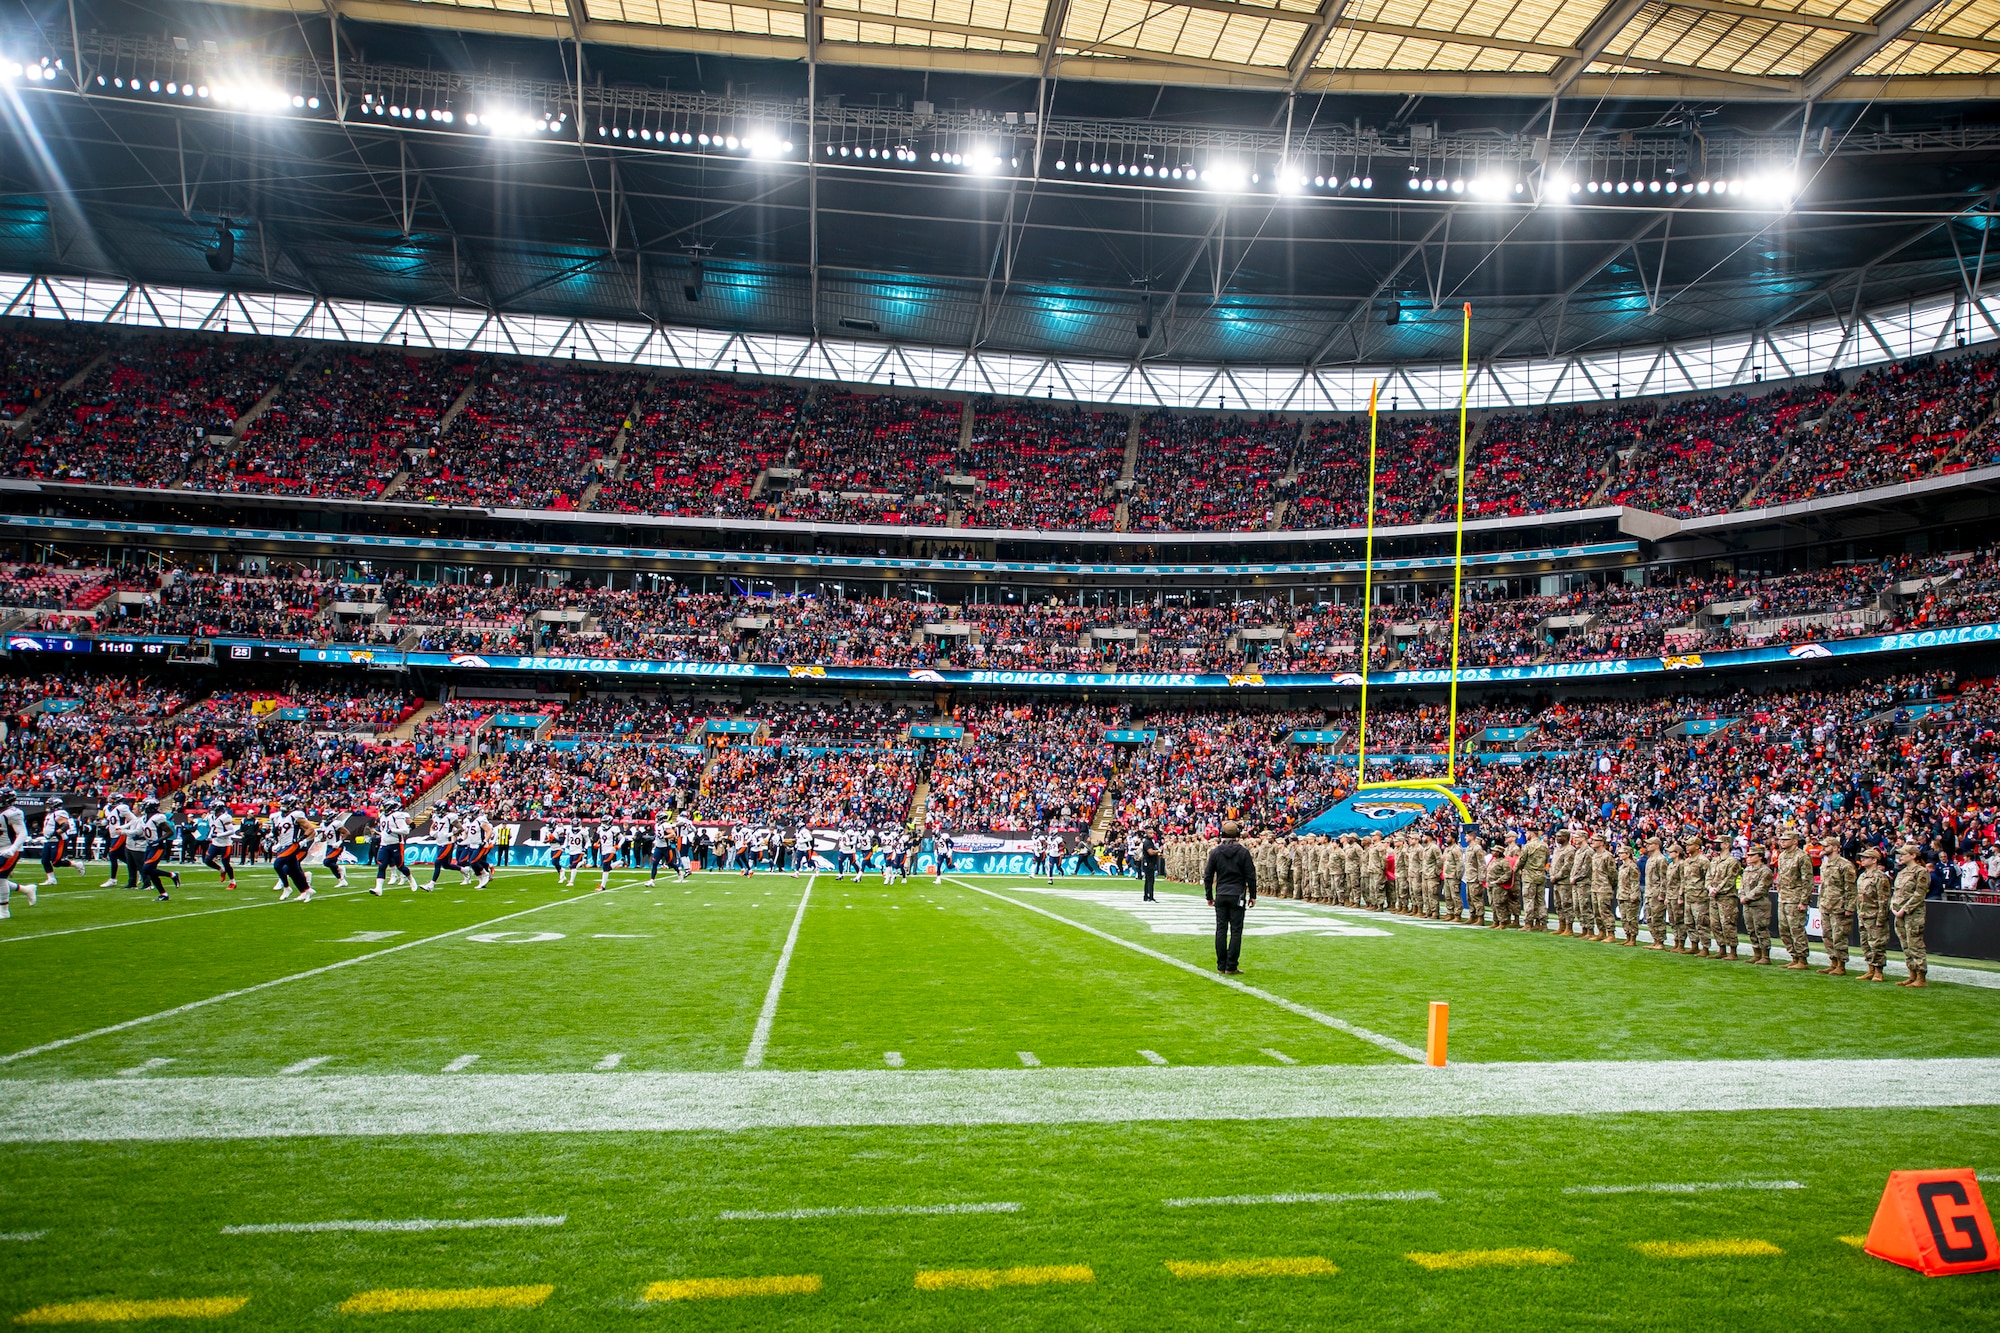 The Denver Broncos, left, run onto the field prior to the national anthem at Wembley Stadium, in London, England, Oct. 30, 2022. Approximately 70 uniformed personnel represented the U.S. Air Force and nation by unveiling an American flag during the pre-game ceremonies of the Jacksonville Jaguars and Denver Broncos NFL game. (U.S. Air Force photo by Staff Sgt. Eugene Oliver)